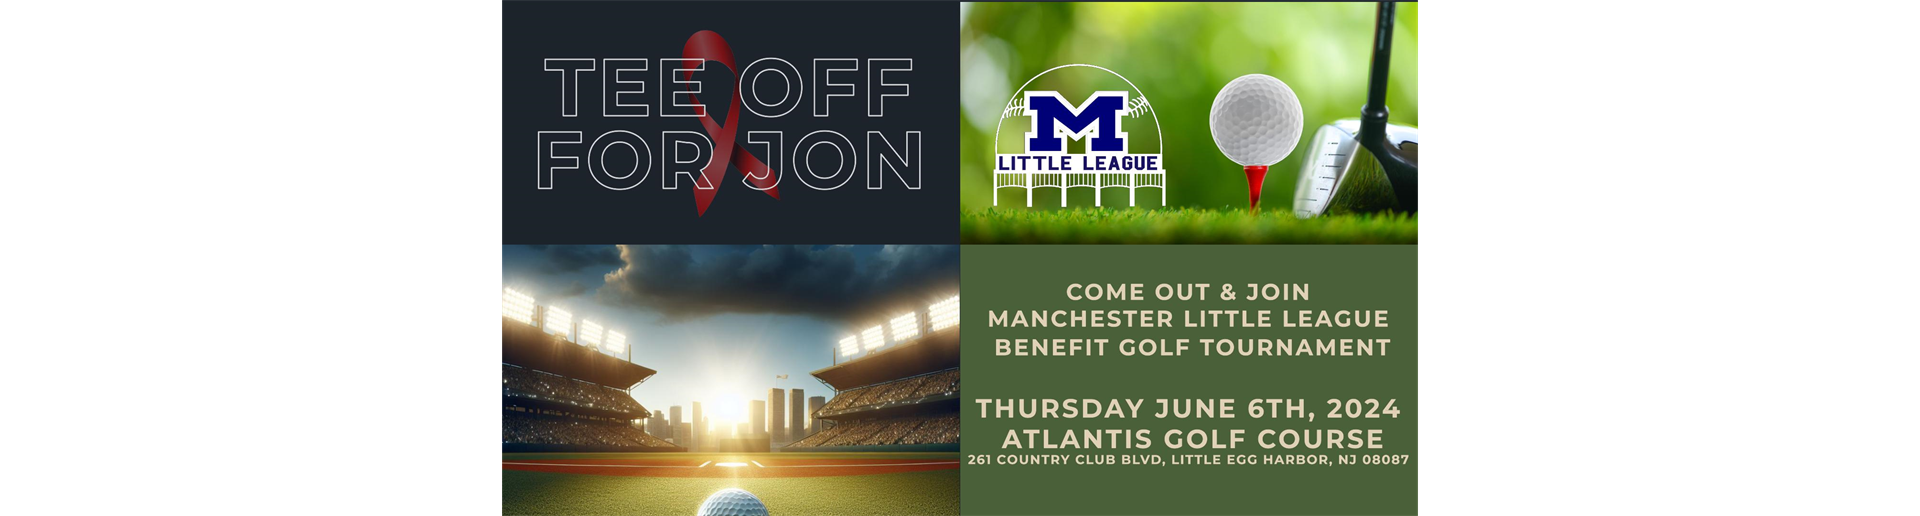 MLL Golf Outing - Tee Off for Jon